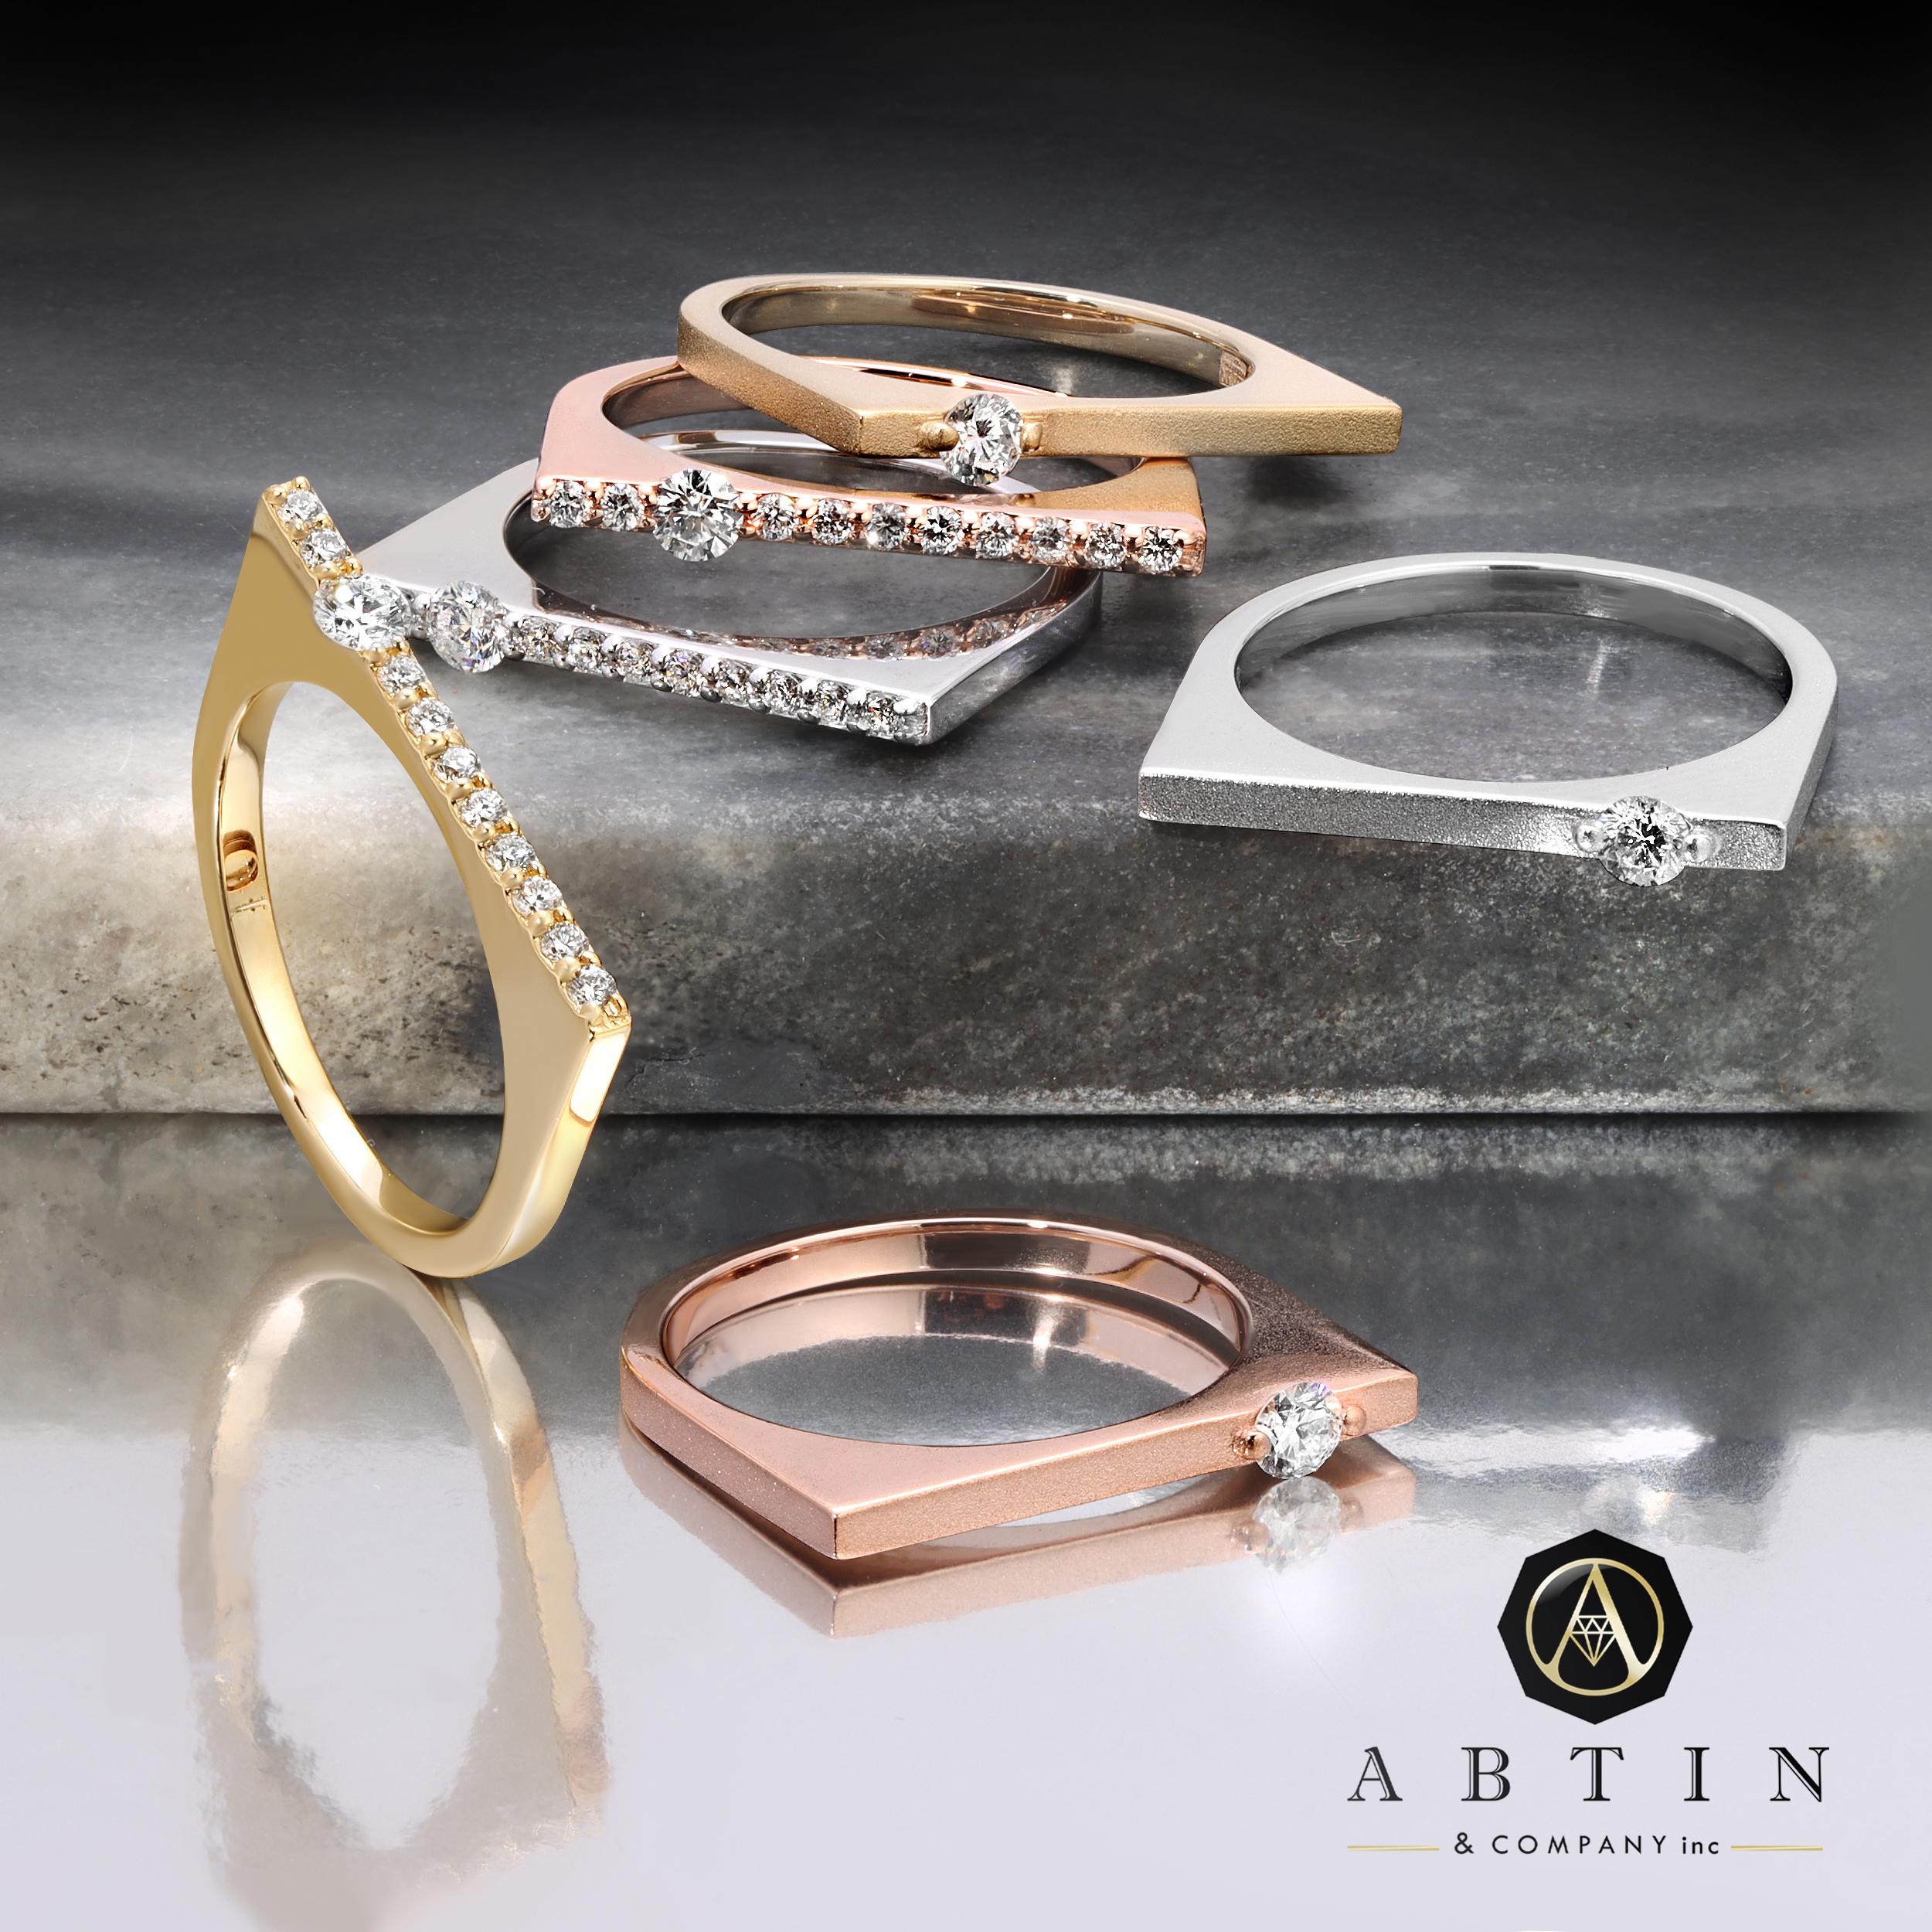 A timeless and classic ring crafted from 14k solid gold, featuring a delicate round diamond on a polished band. Ideal for wearing alone or stacking with other rings. Available in yellow, white, or rose gold.

Gold Weight: 2.80 gr.
Diamond Weight: